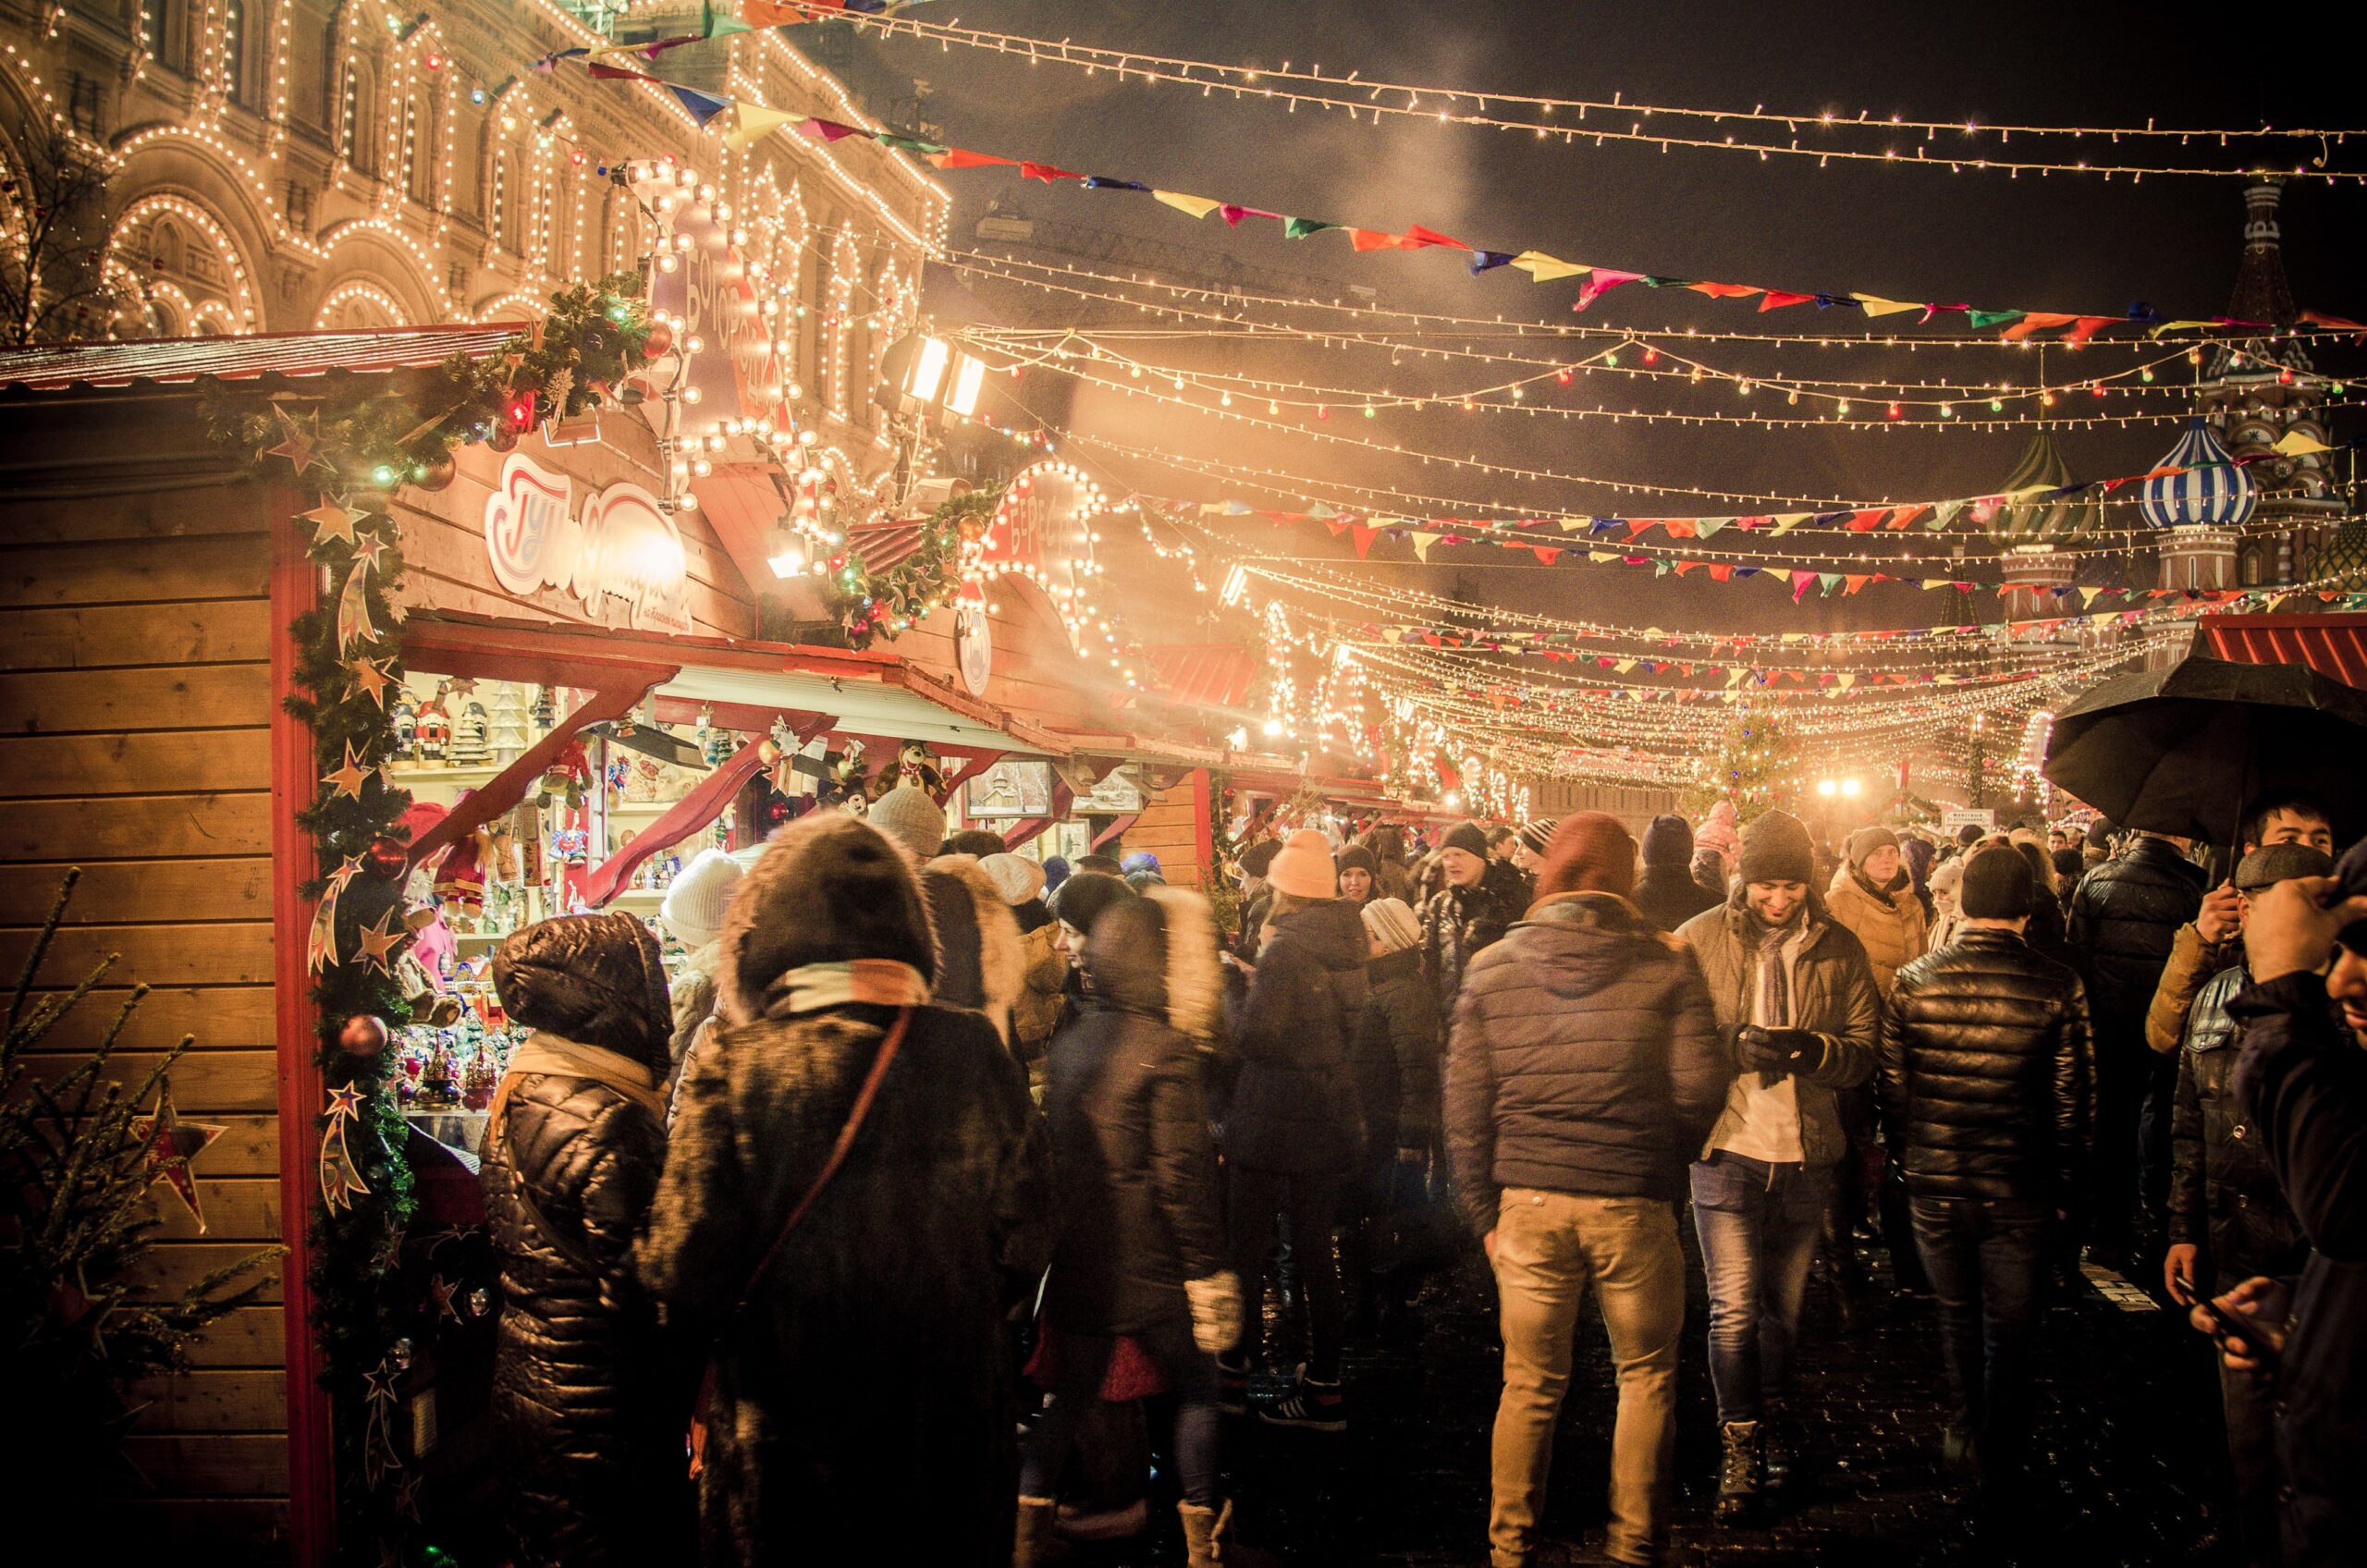 Photo of a Christmas market with lots of different food stalls and a crowd of people wearing jumpers and coats standing around them. The image is dark and cosy.